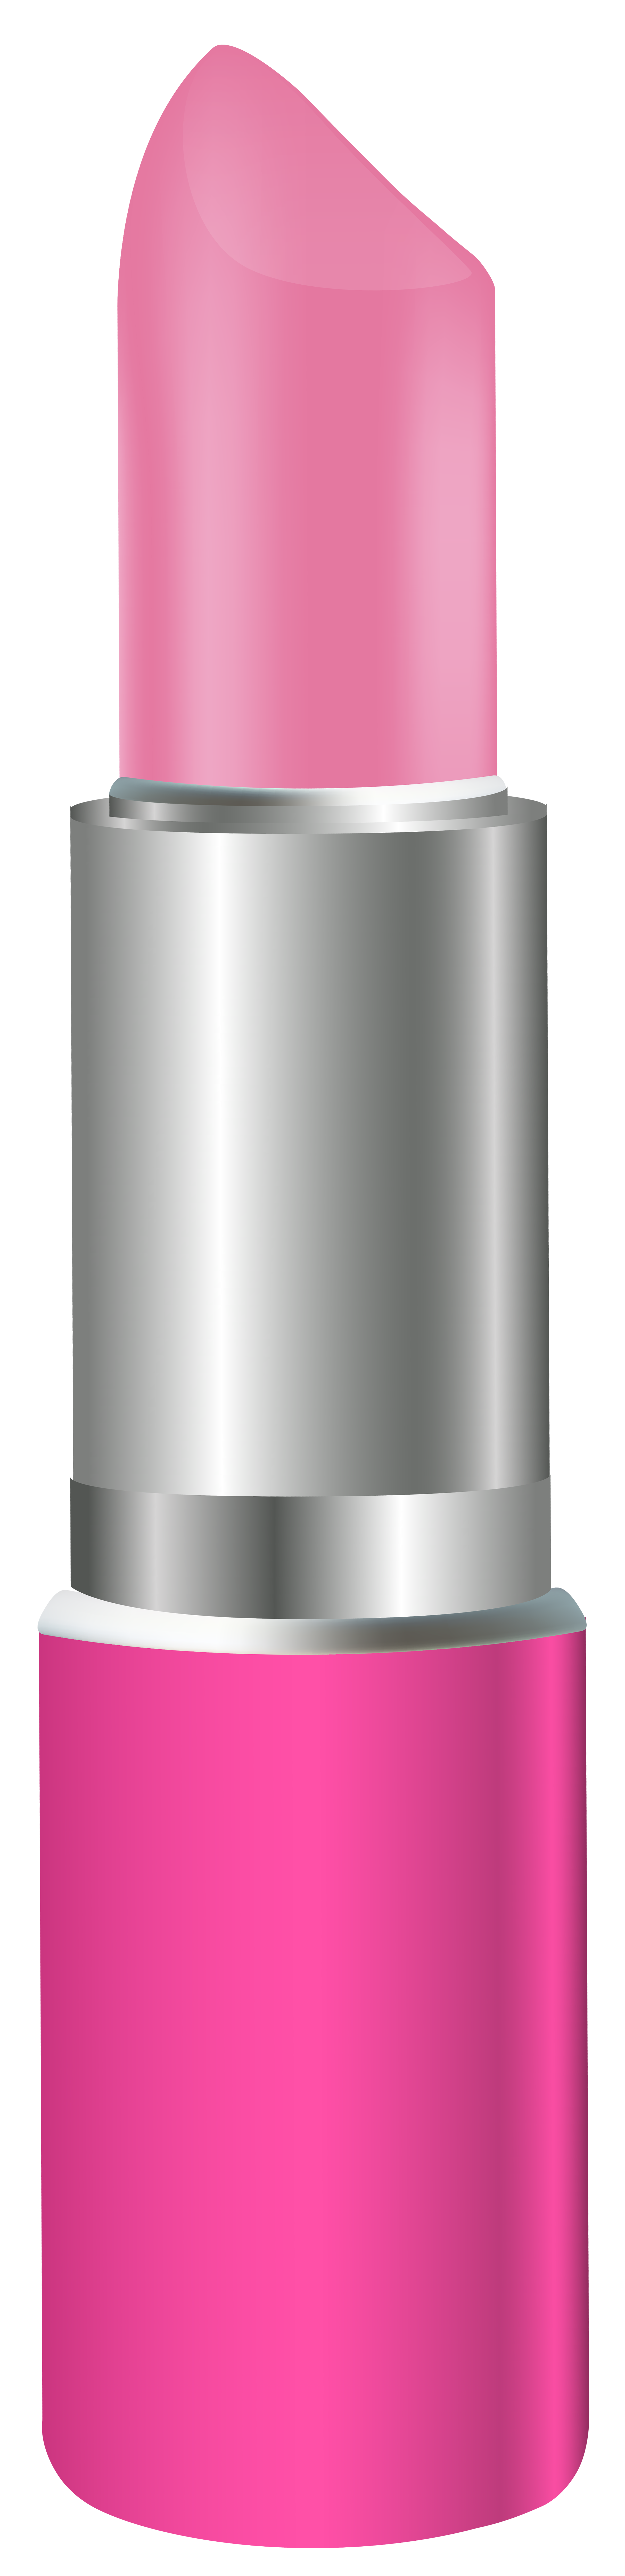 Lipstick Png Picture - Lipstick, Transparent background PNG HD thumbnail